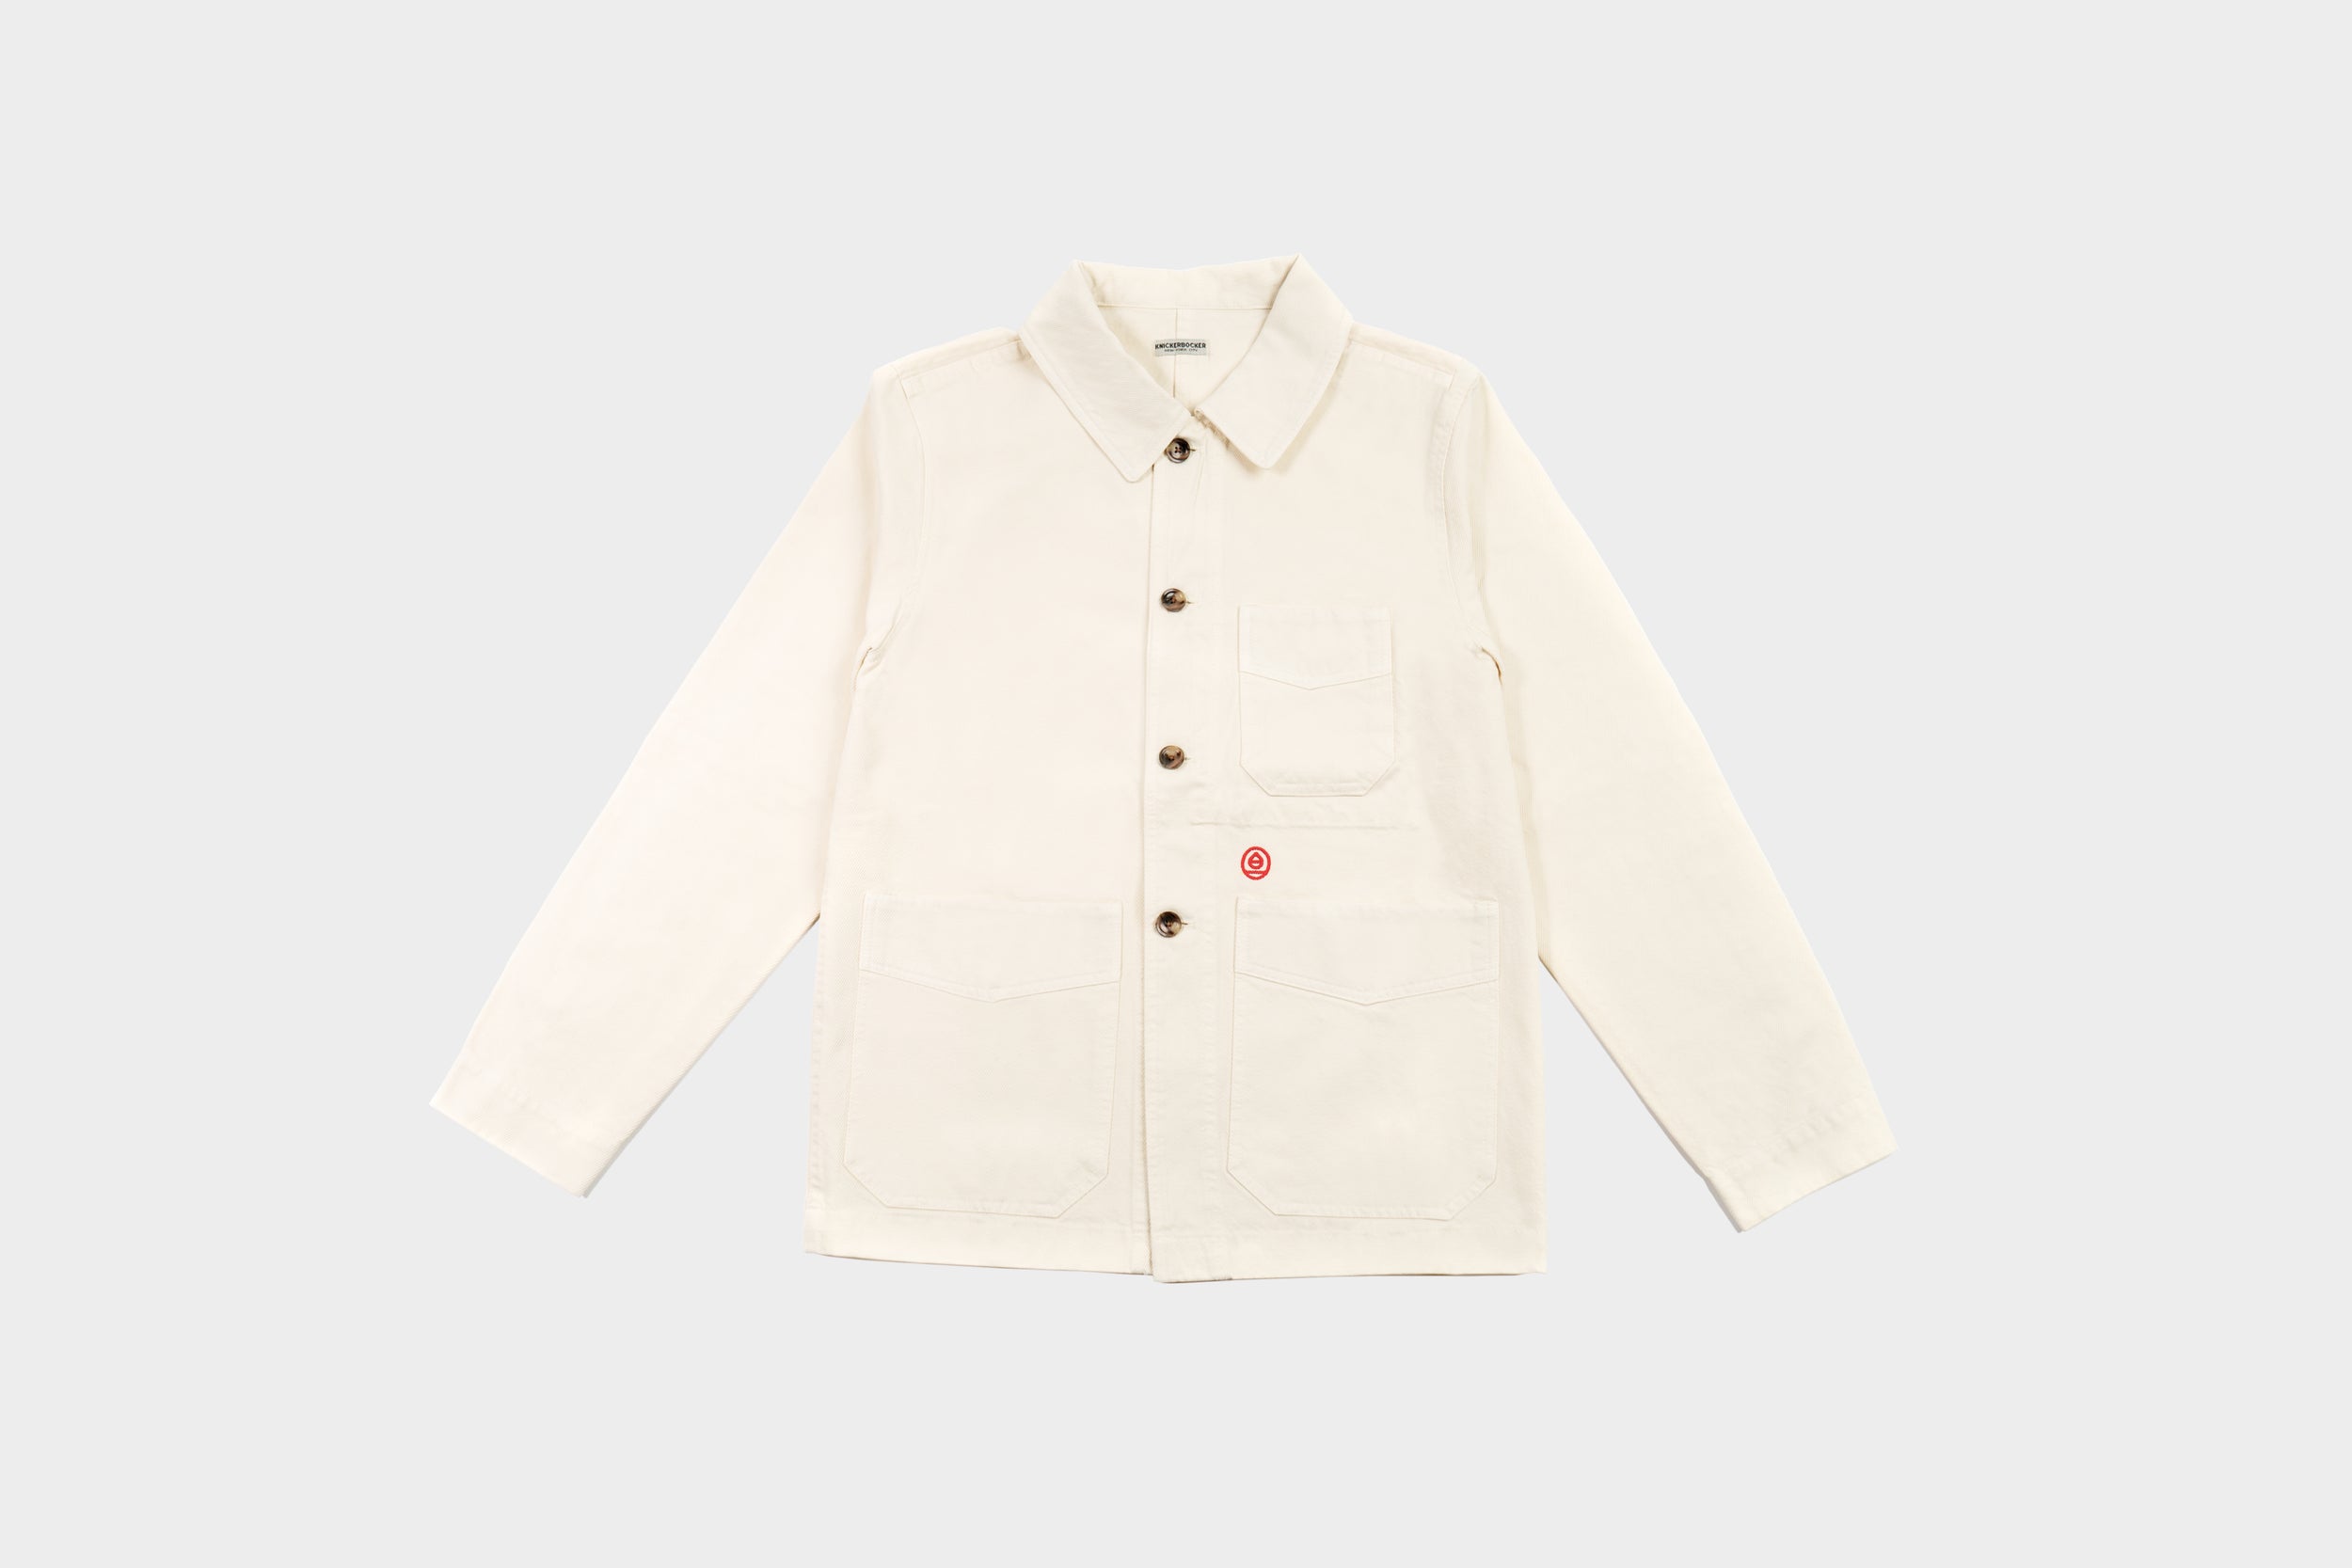 Terra Kaffe | Front view of cream-colored jacket with Terra Kaffe logo